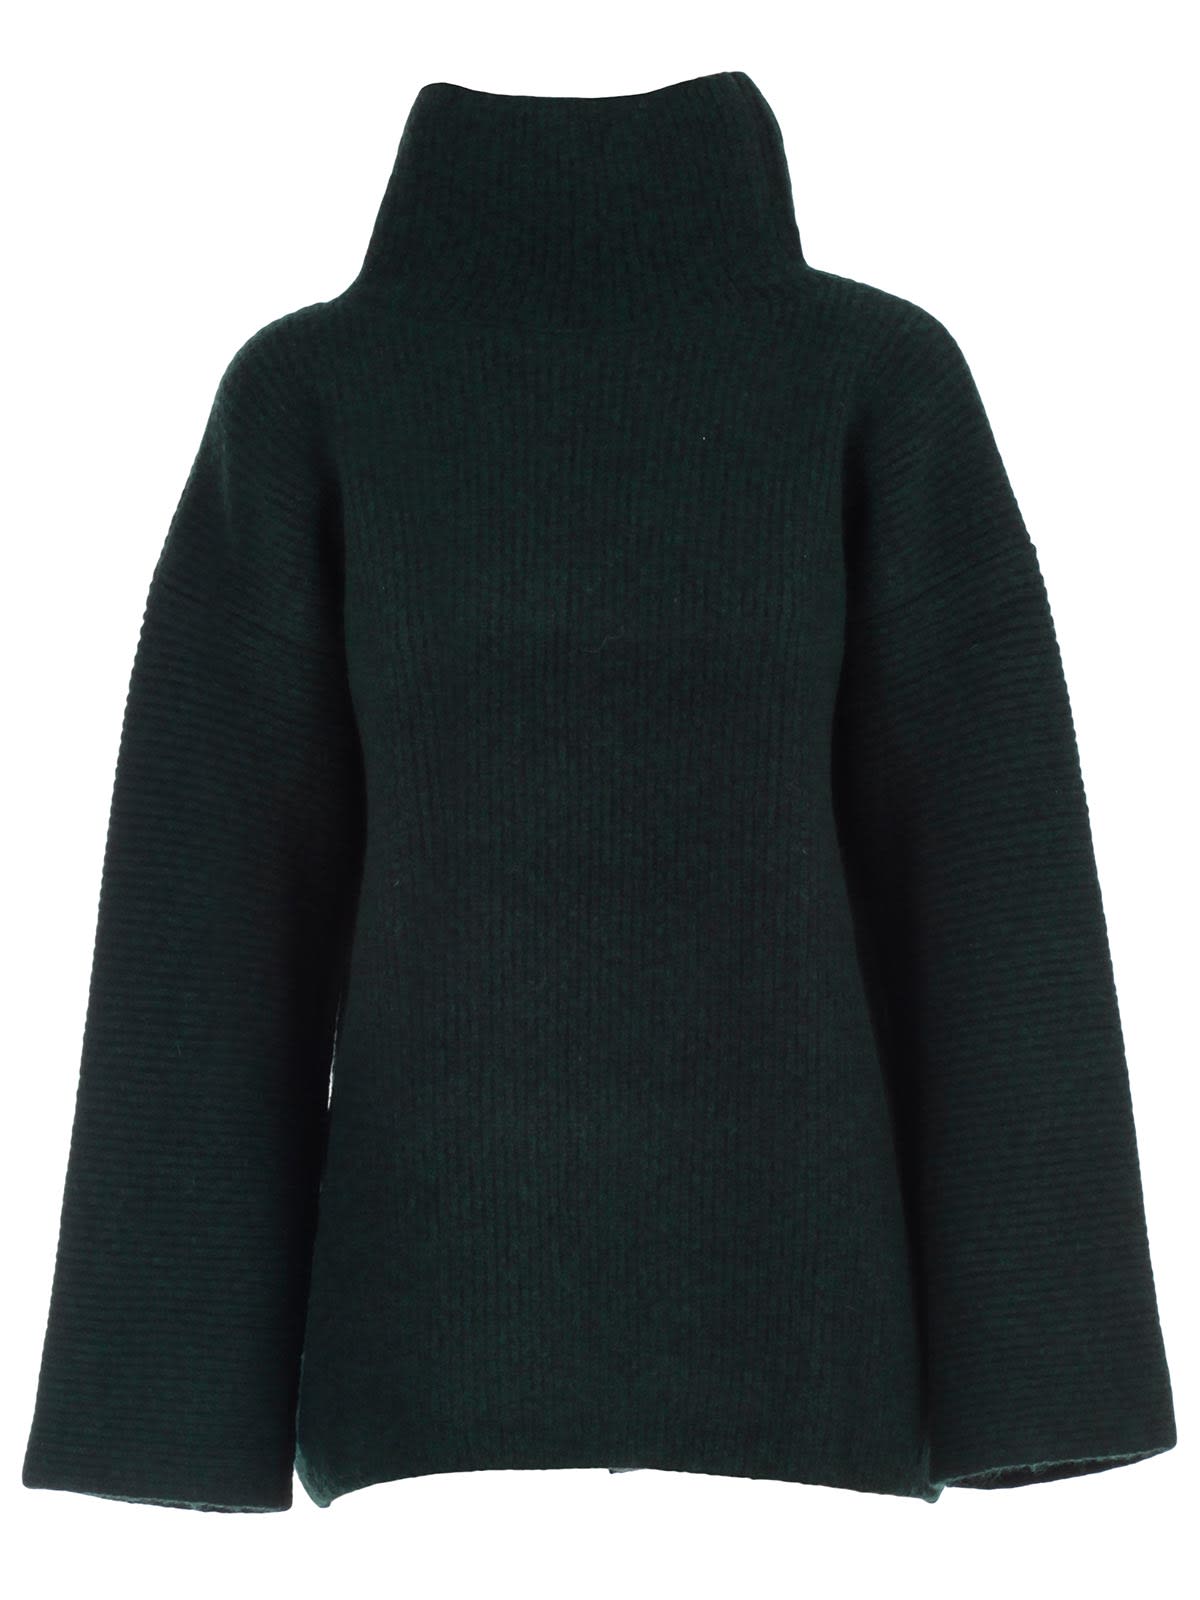 JACQUEMUS LE MAILLE AGDE SWEATER HIGH NECK W/RIBS,11145032